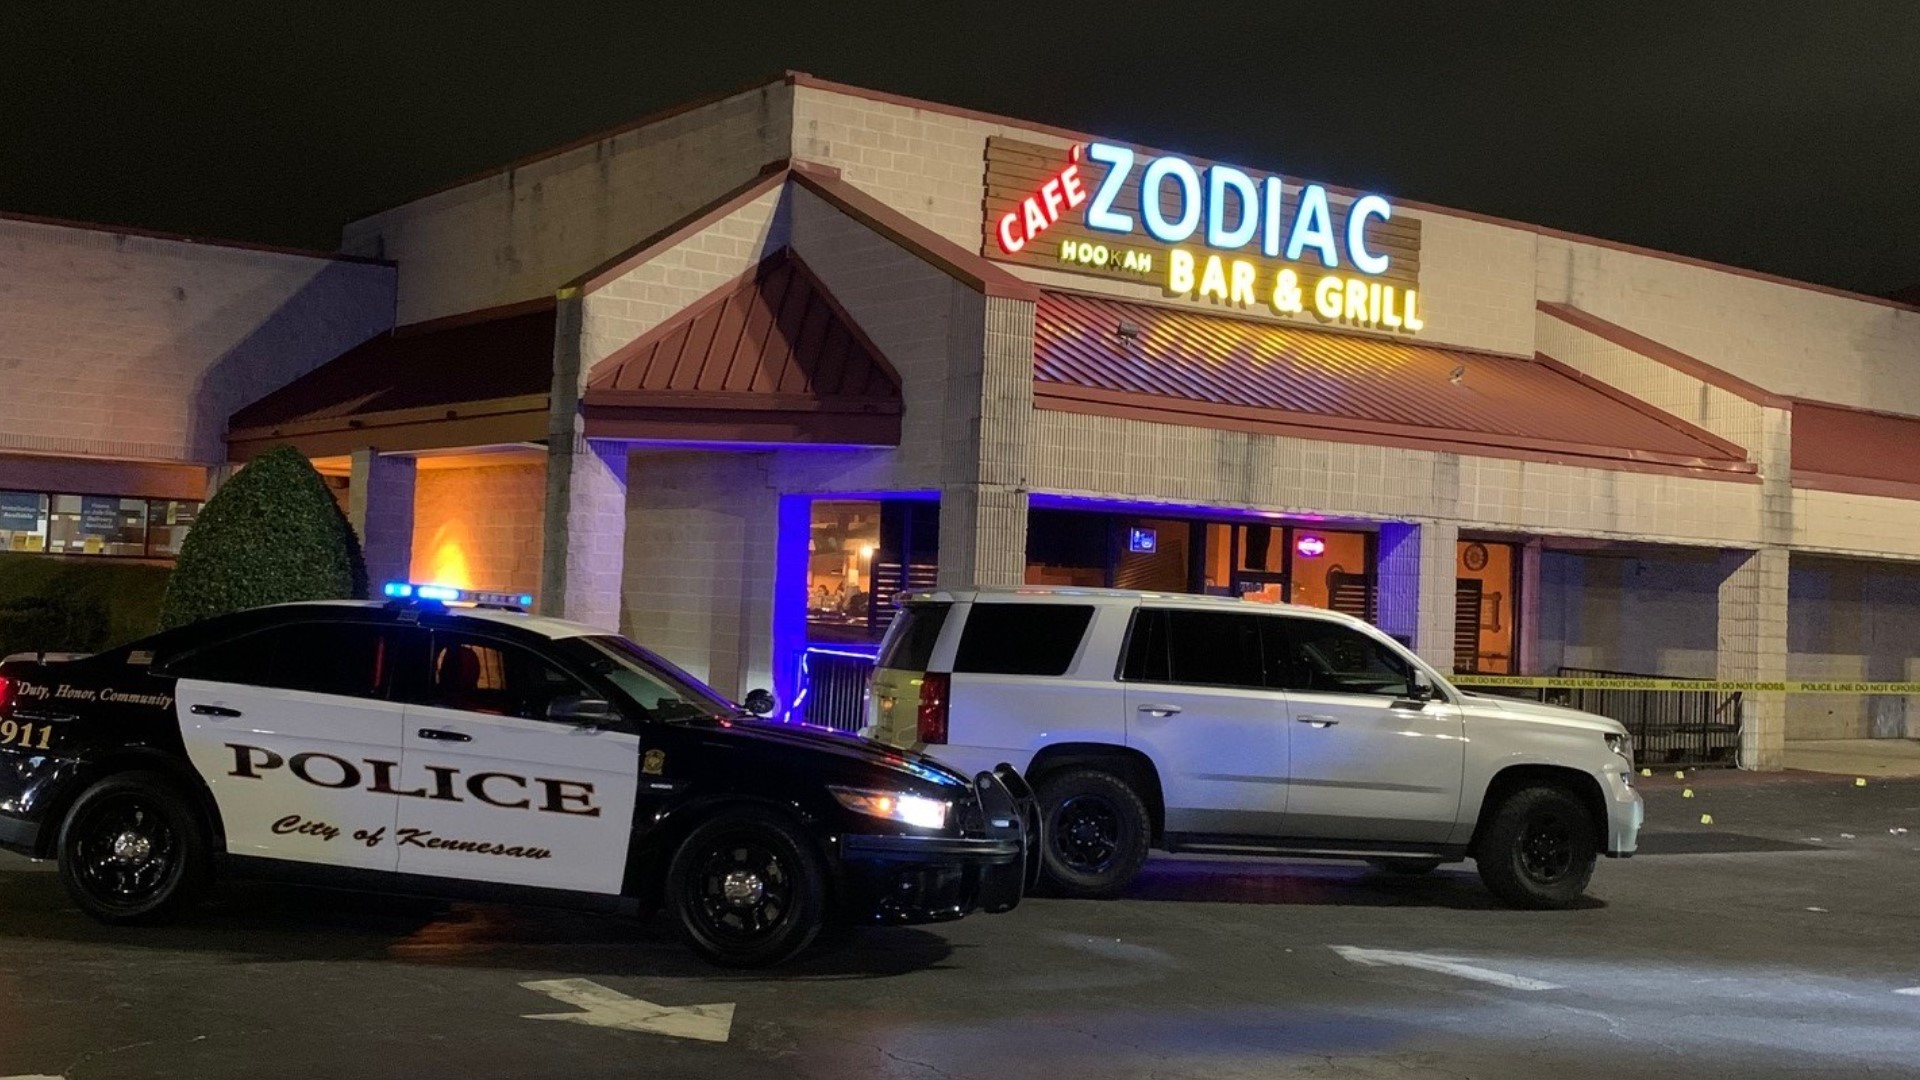 It happened at Cafe Zodiac Hookah Bar & Grill off Cobb Parkway.